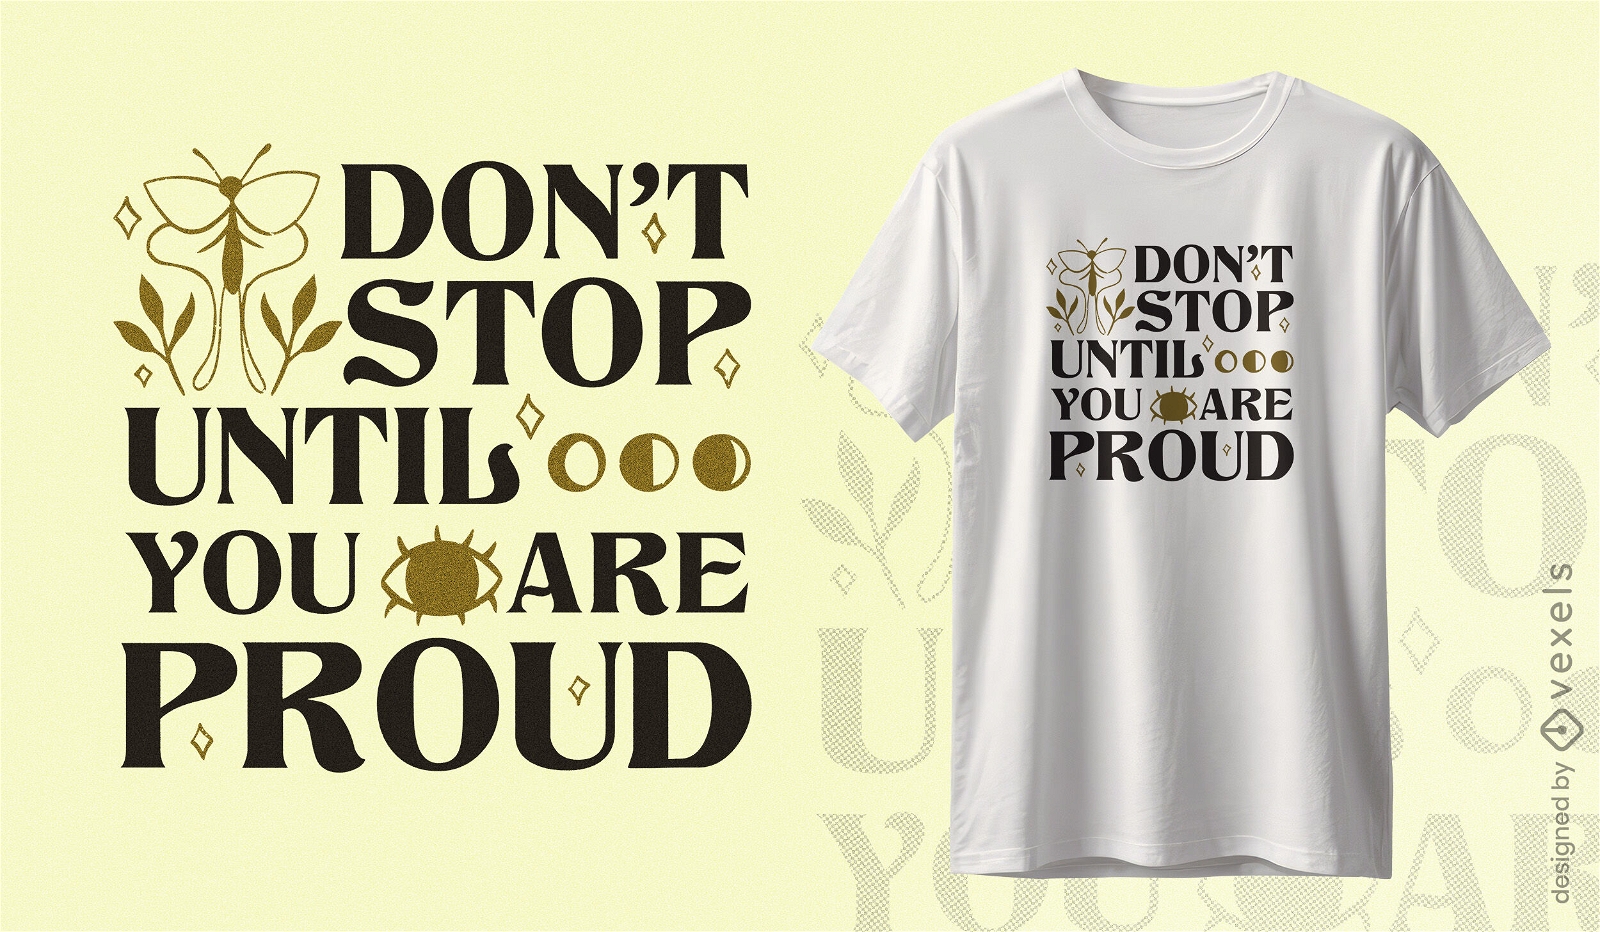 Nature-inspired motivational quote t-shirt design